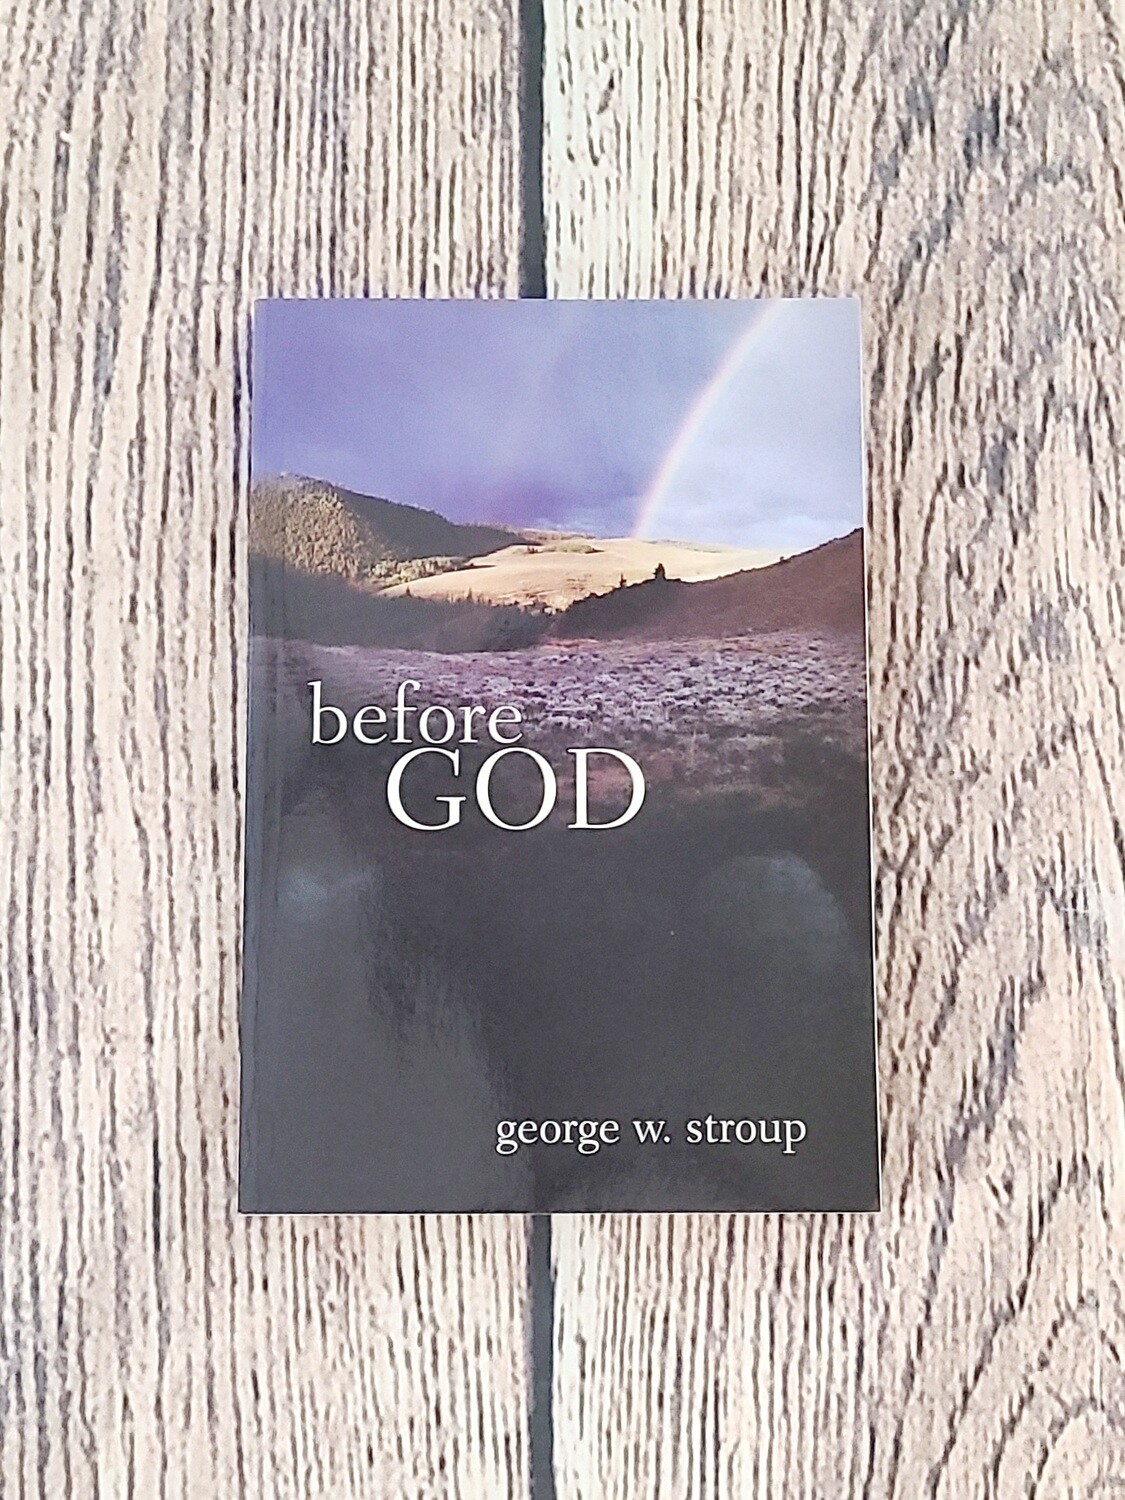 Before God by George W. Stroup